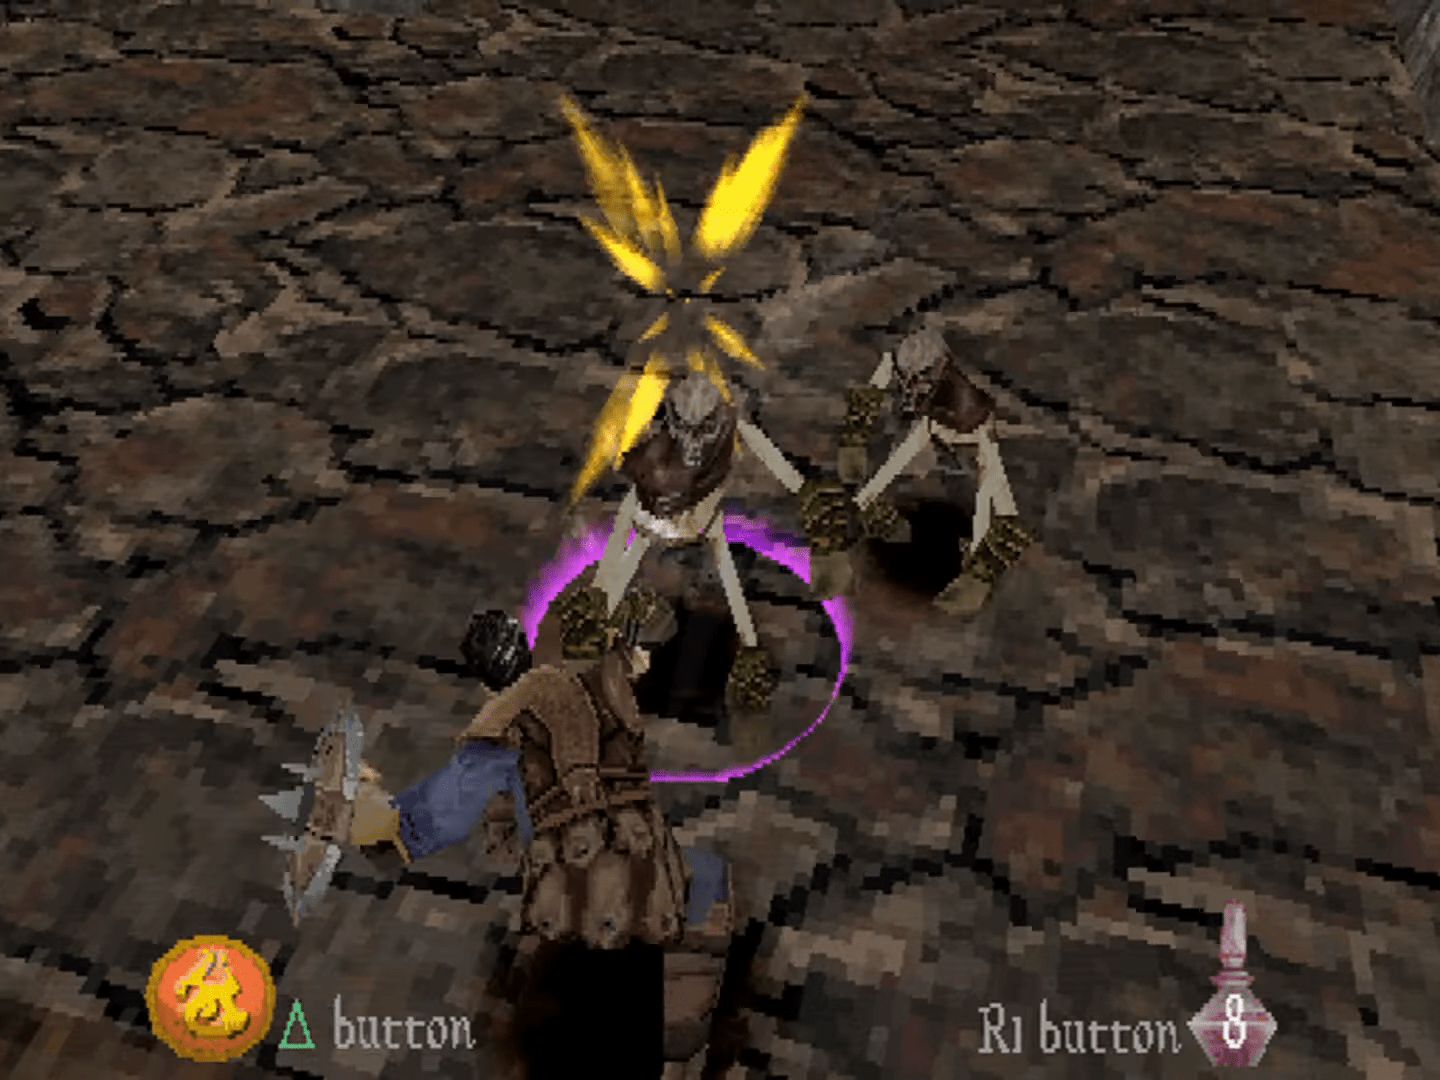 download might and magic ps1